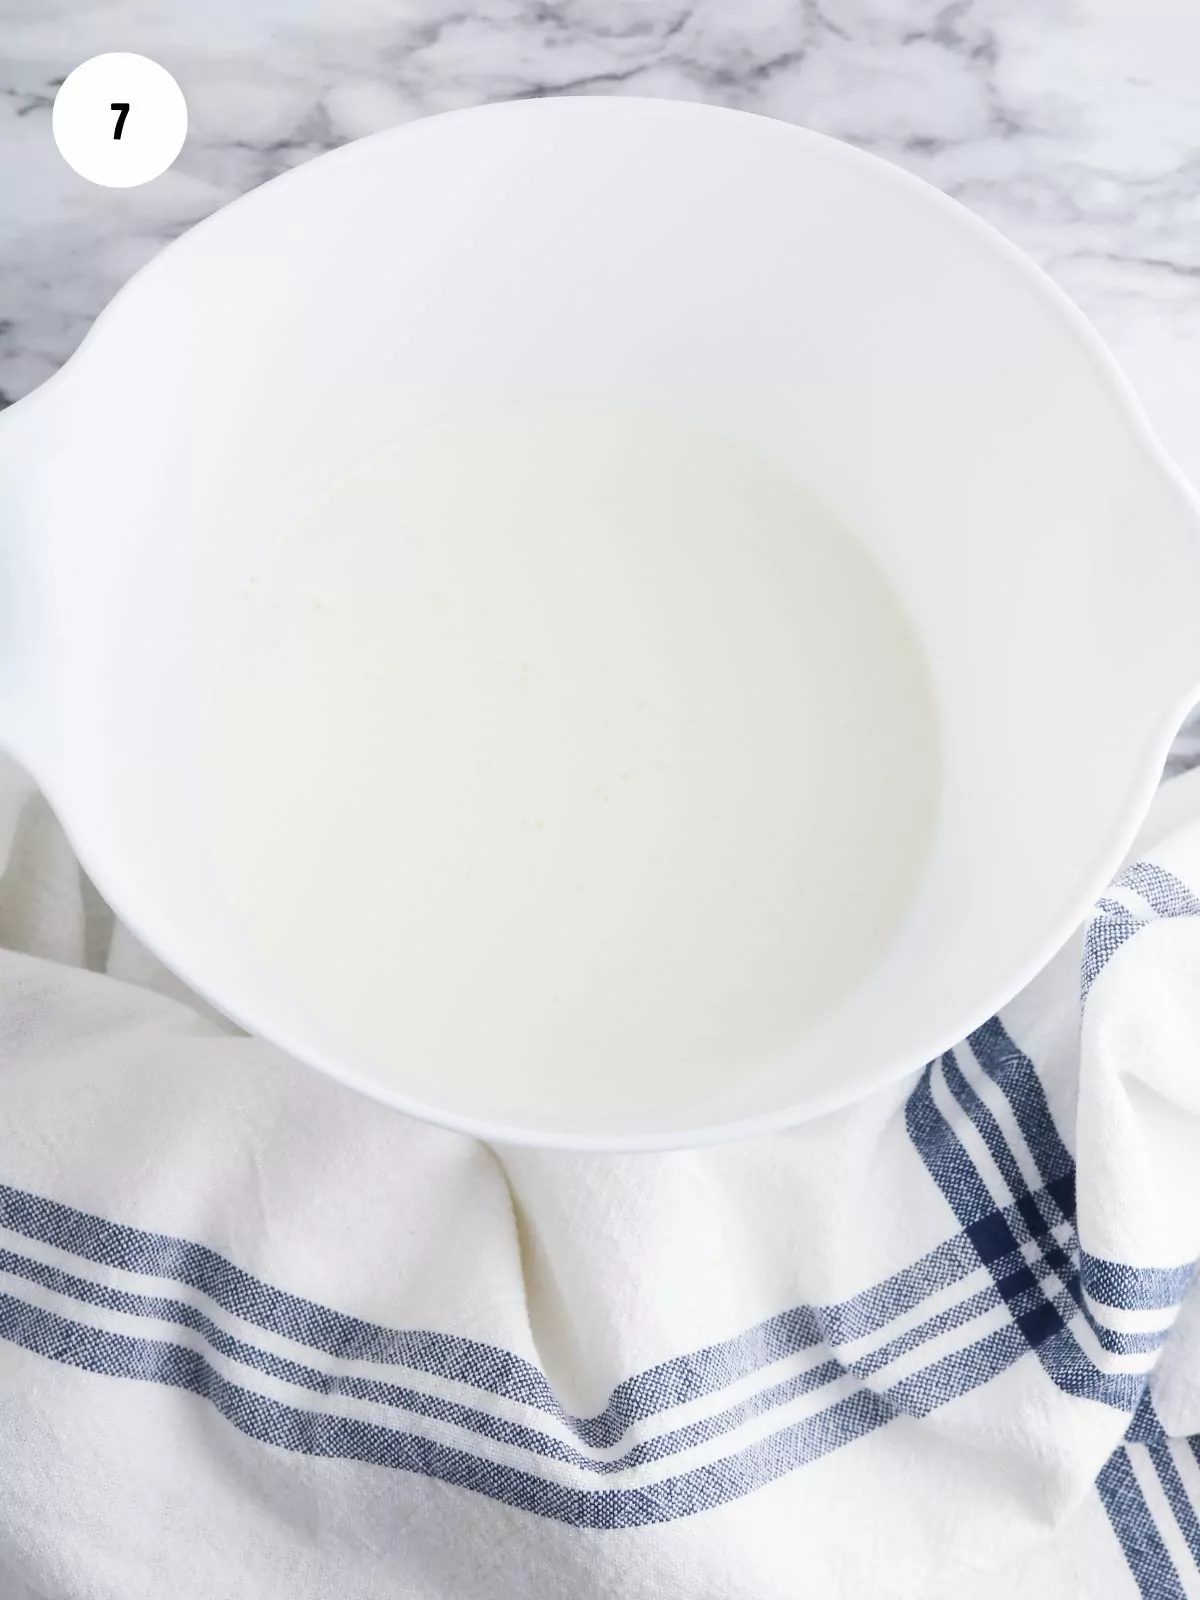 Heavy Cream and sugar in mixing bowl